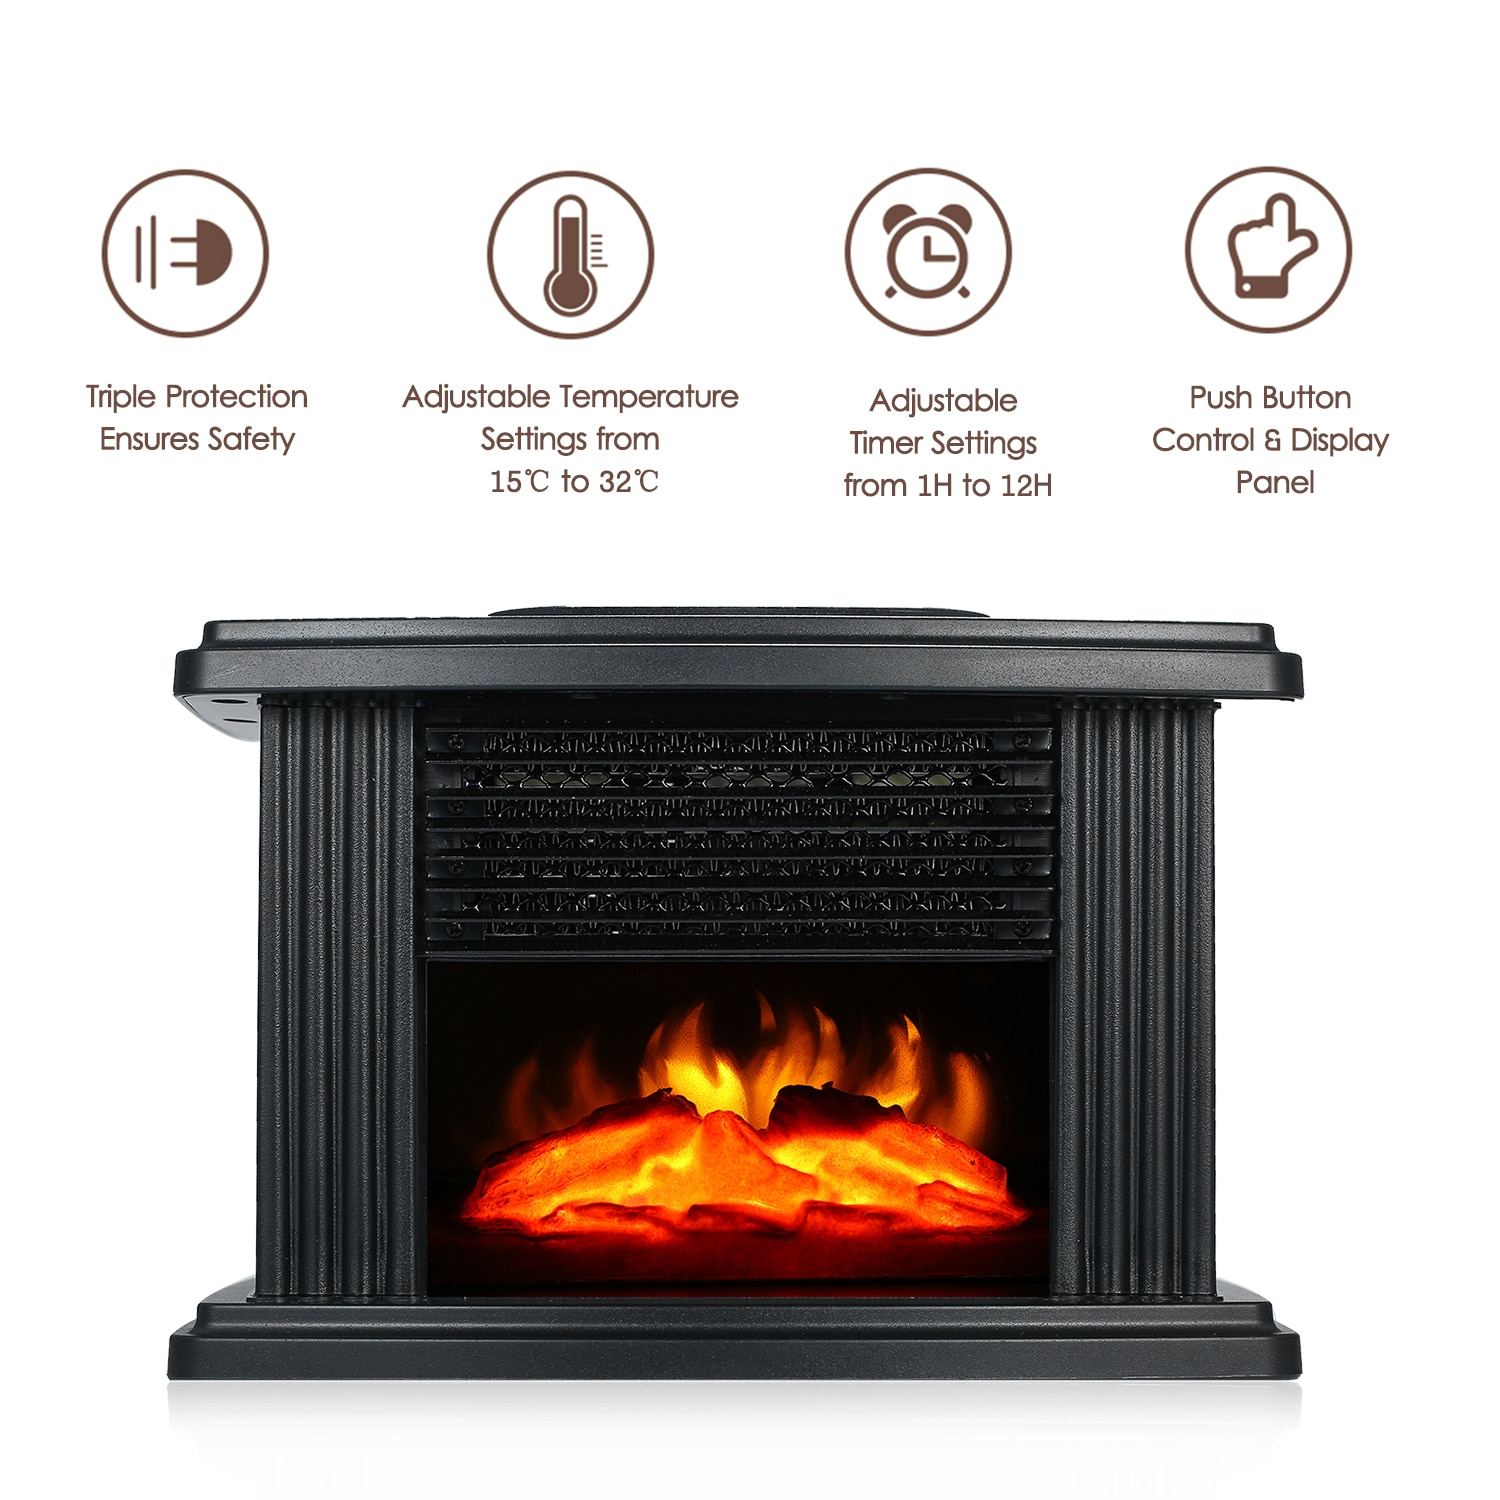 Us 3146 38 Off1000w Desktop Electric Fireplace Heater With Log Flame Effect Warm Air Heater Warm Small Warm Air Blower Fan Table Heater throughout proportions 1500 X 1500